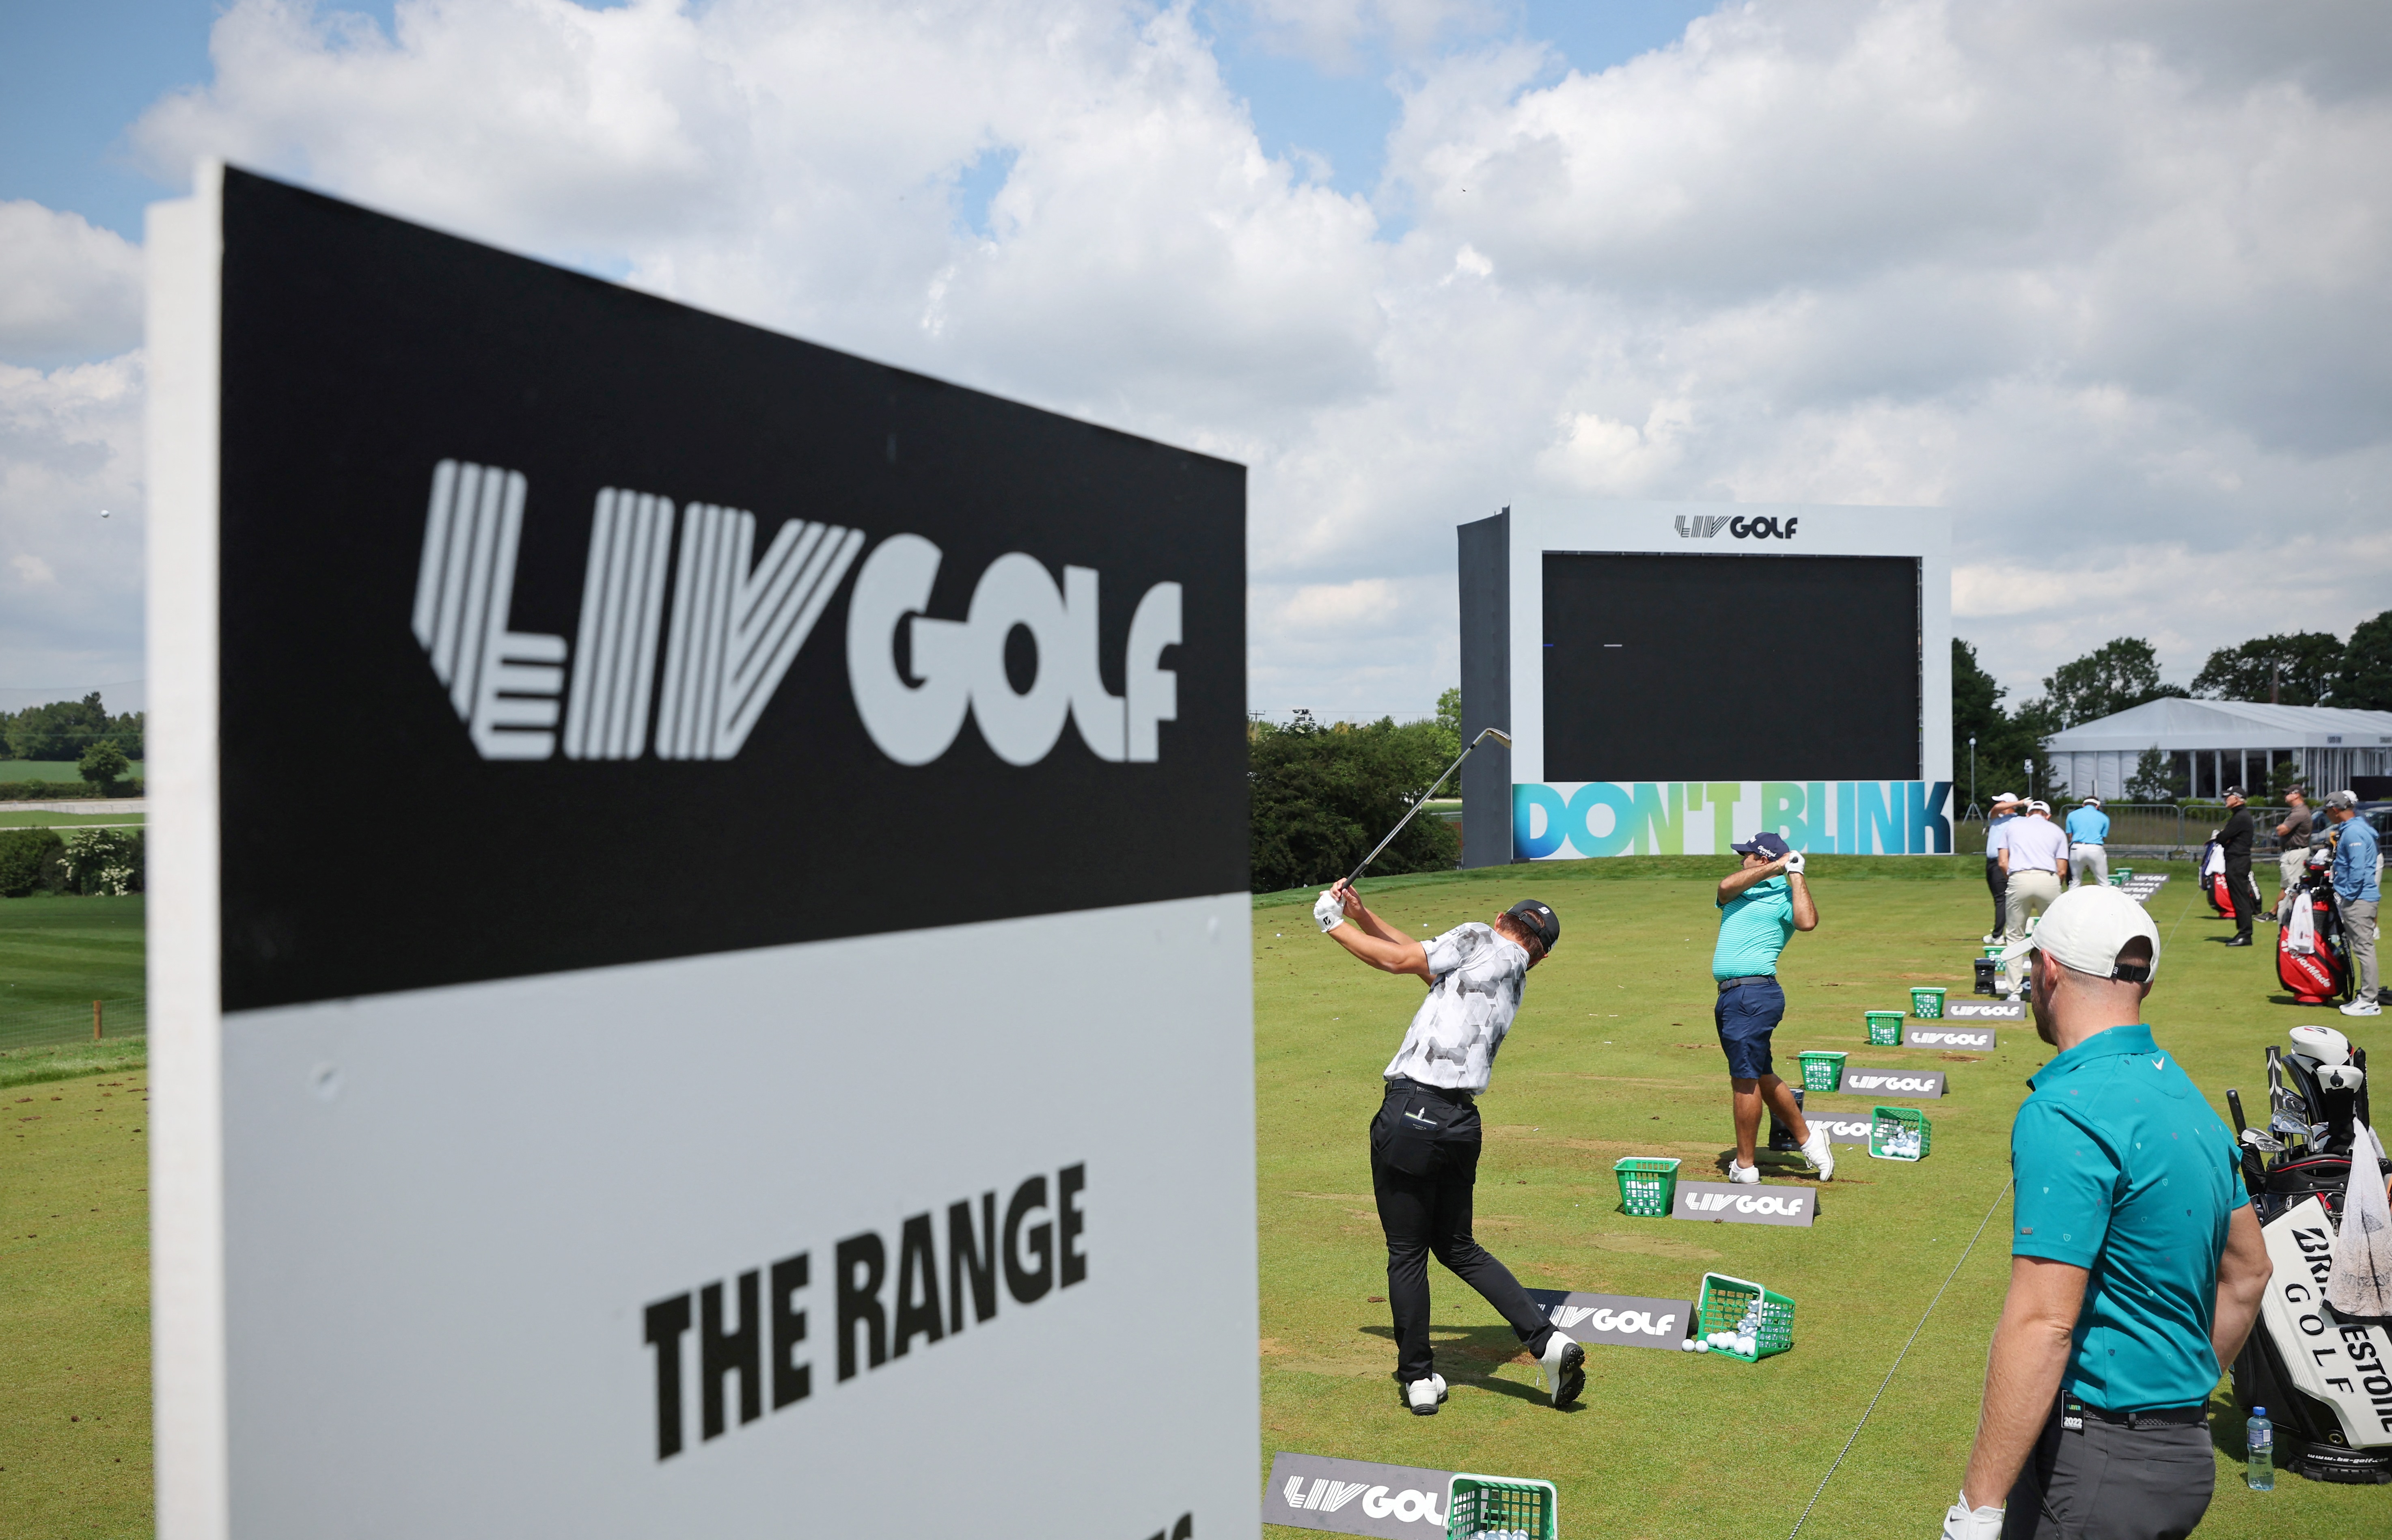 LIV Golf series: Everything you need to know